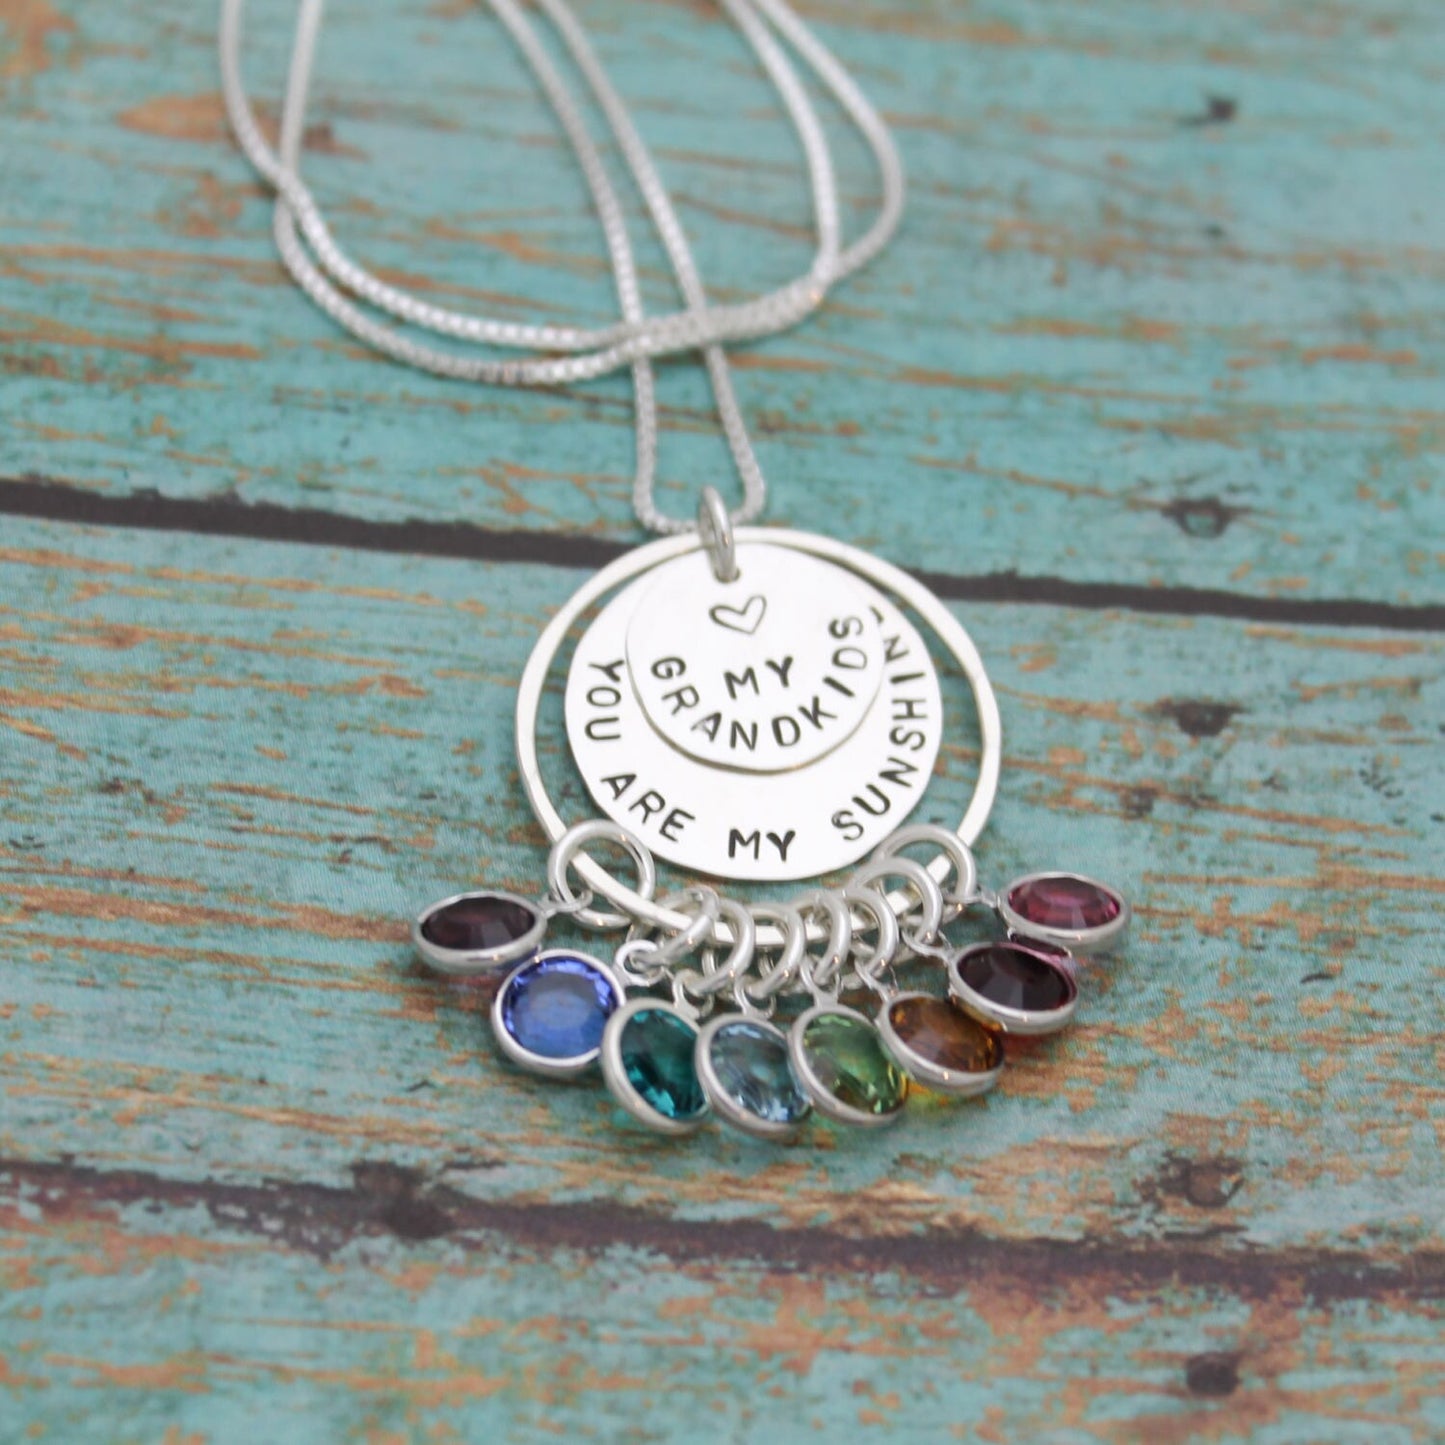 Personalized Grandmother Necklace, You Are My Sunshine Grandma Necklace, Hand Stamped Jewelry, Grandchildren Birthstones, Gifts for Her